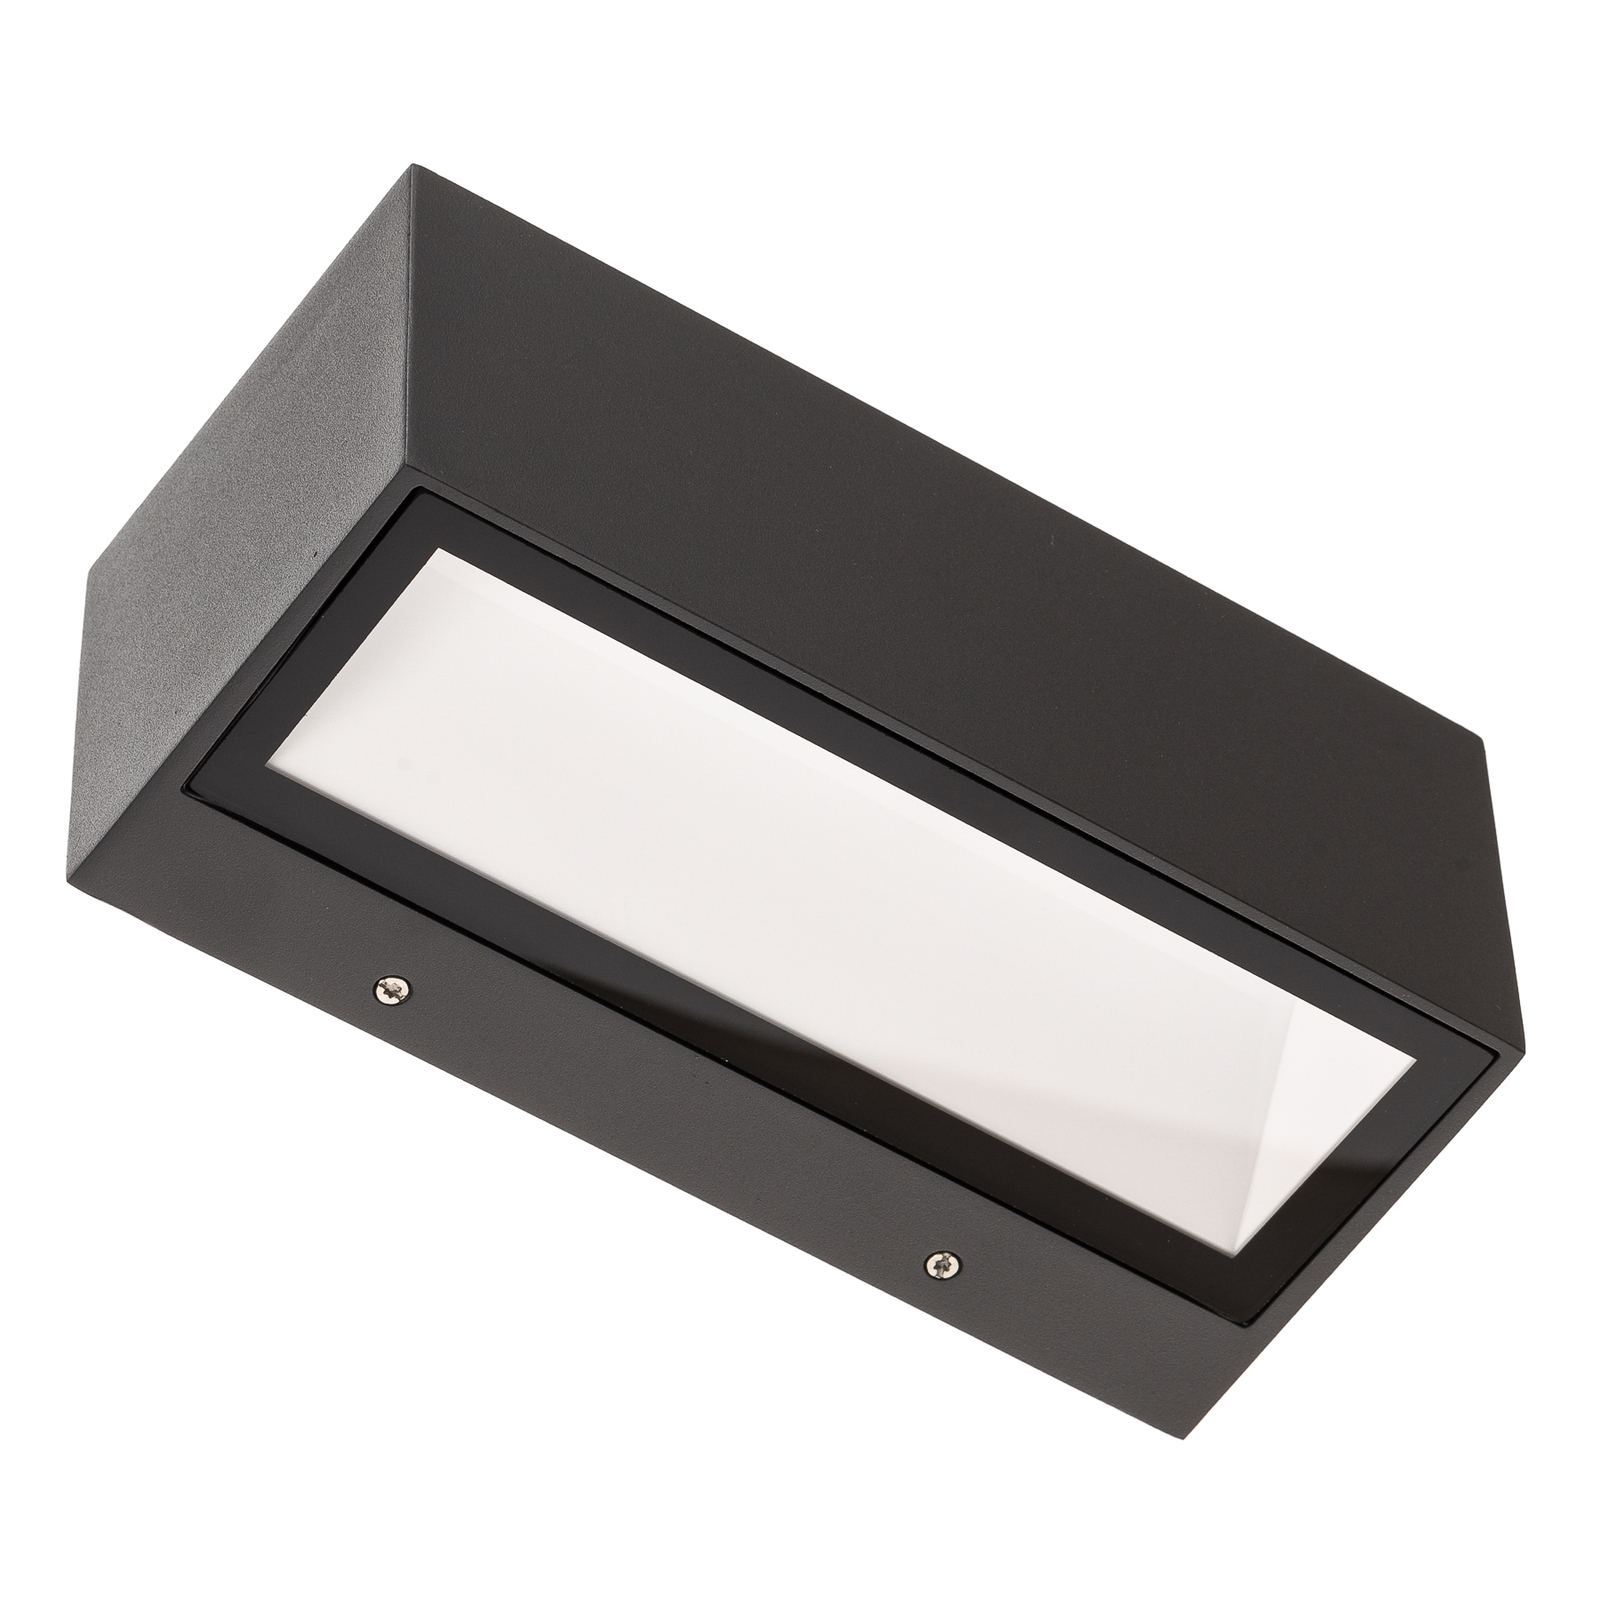 Gemini LED outdoor wall lamp 22cm 4000K anthracite